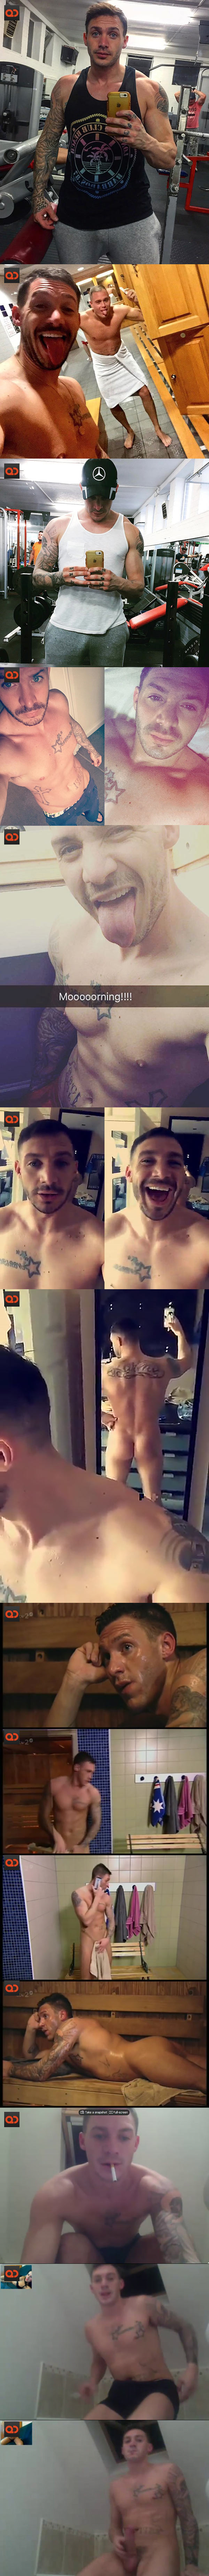 Kirk Norcross, From The Only Way Is Essex, Exposed His Big British Cock In Leaked Skype Video!